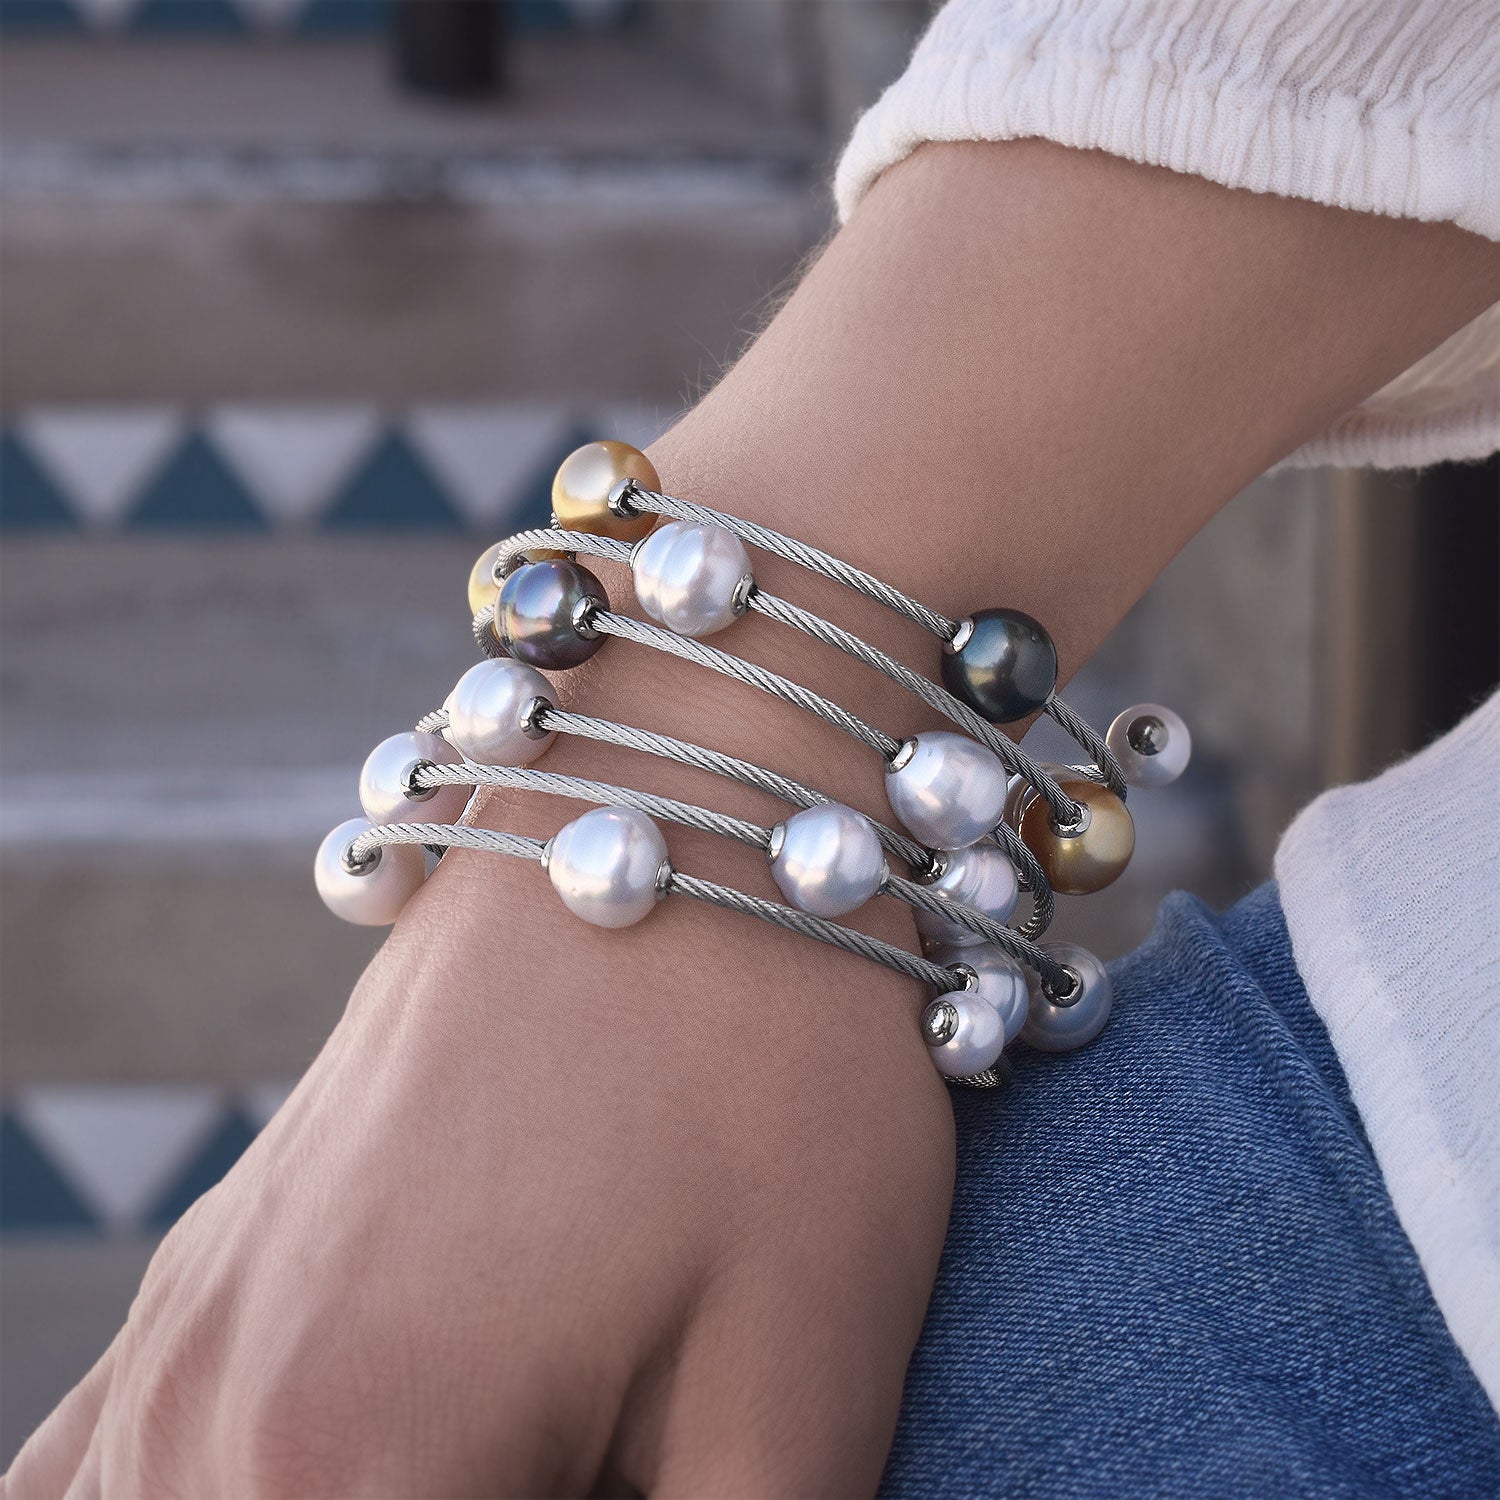 Black, White, & Yellow South Sea Pearl Wrap Bracelet with Grey Cable